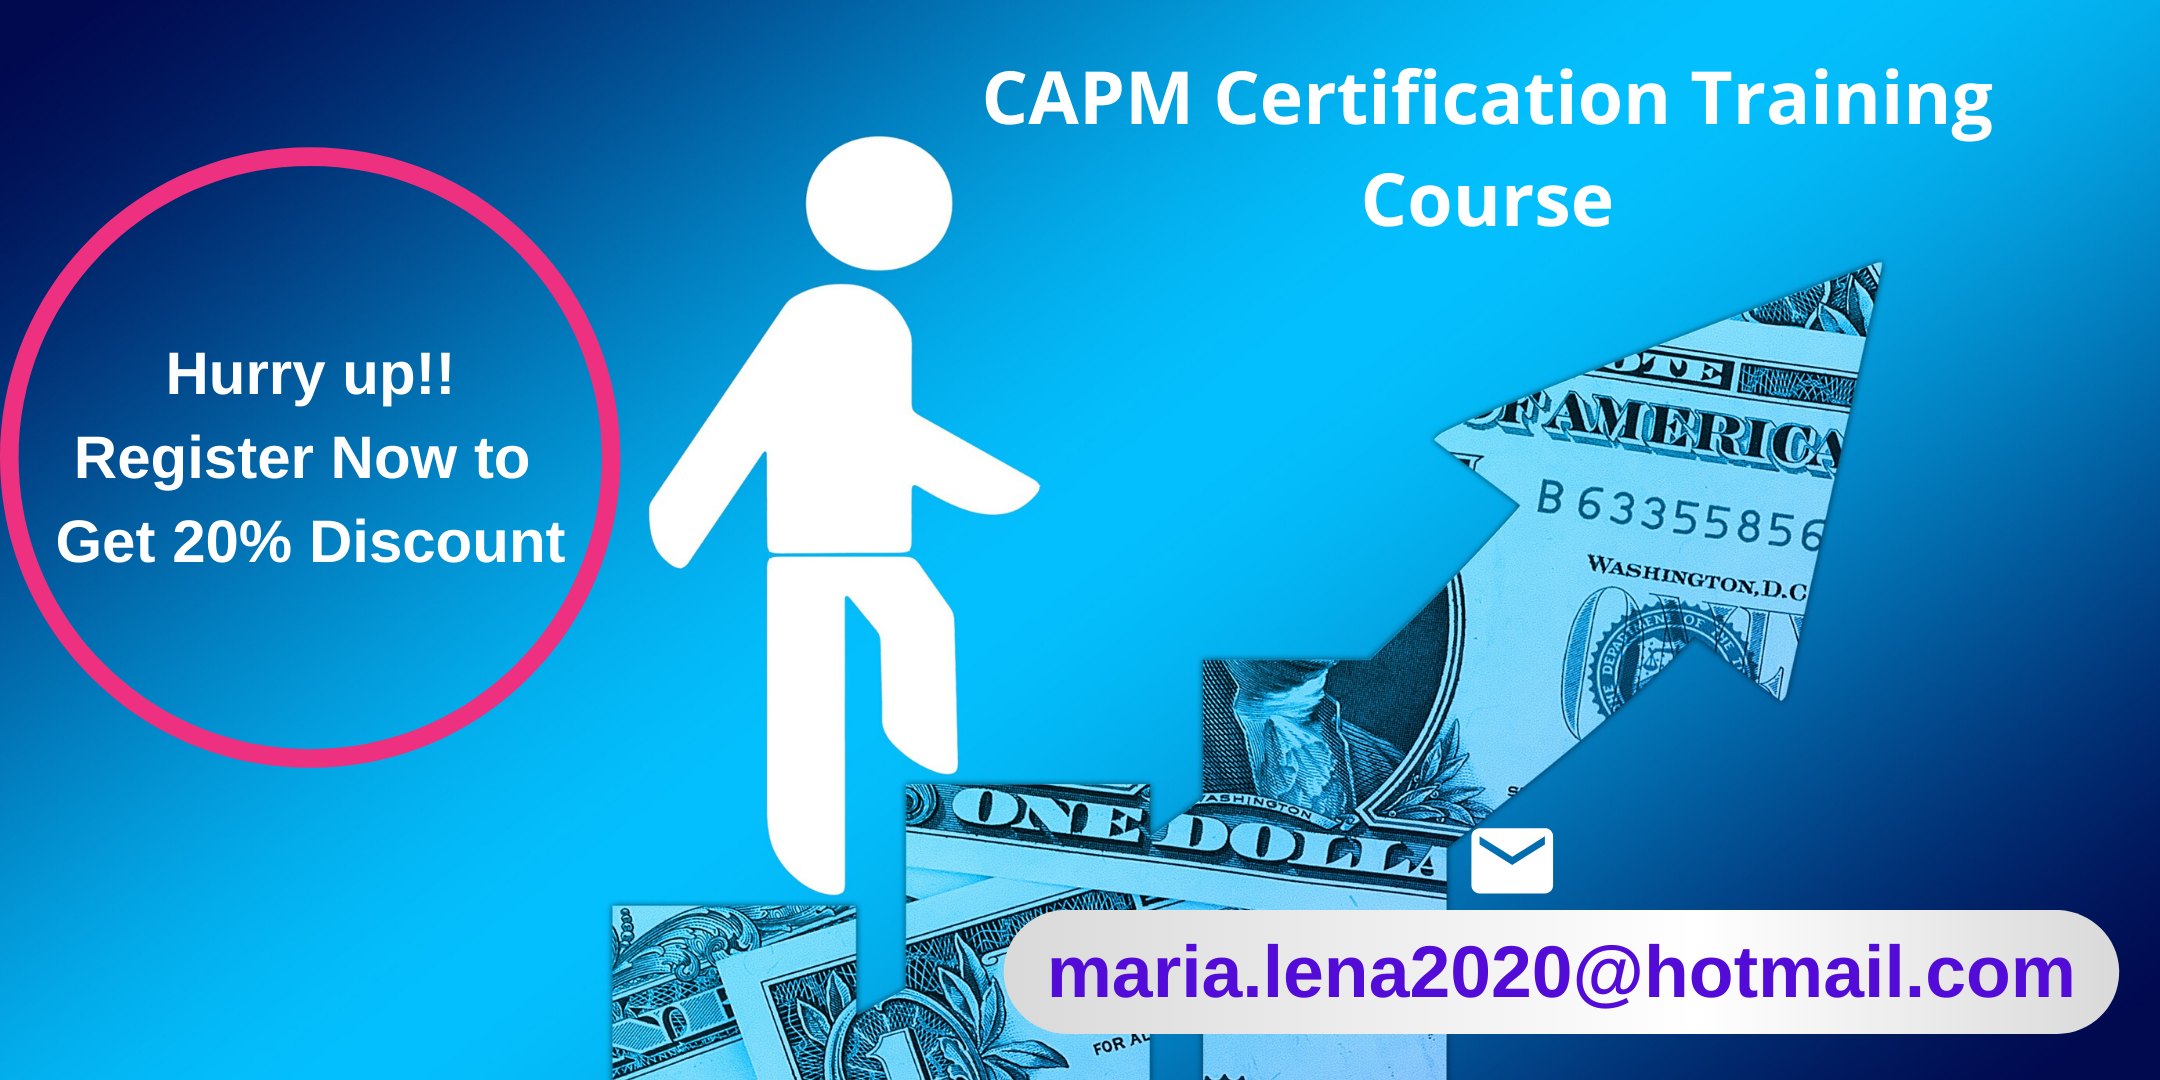 CAPM Certification Training in Albany, CA